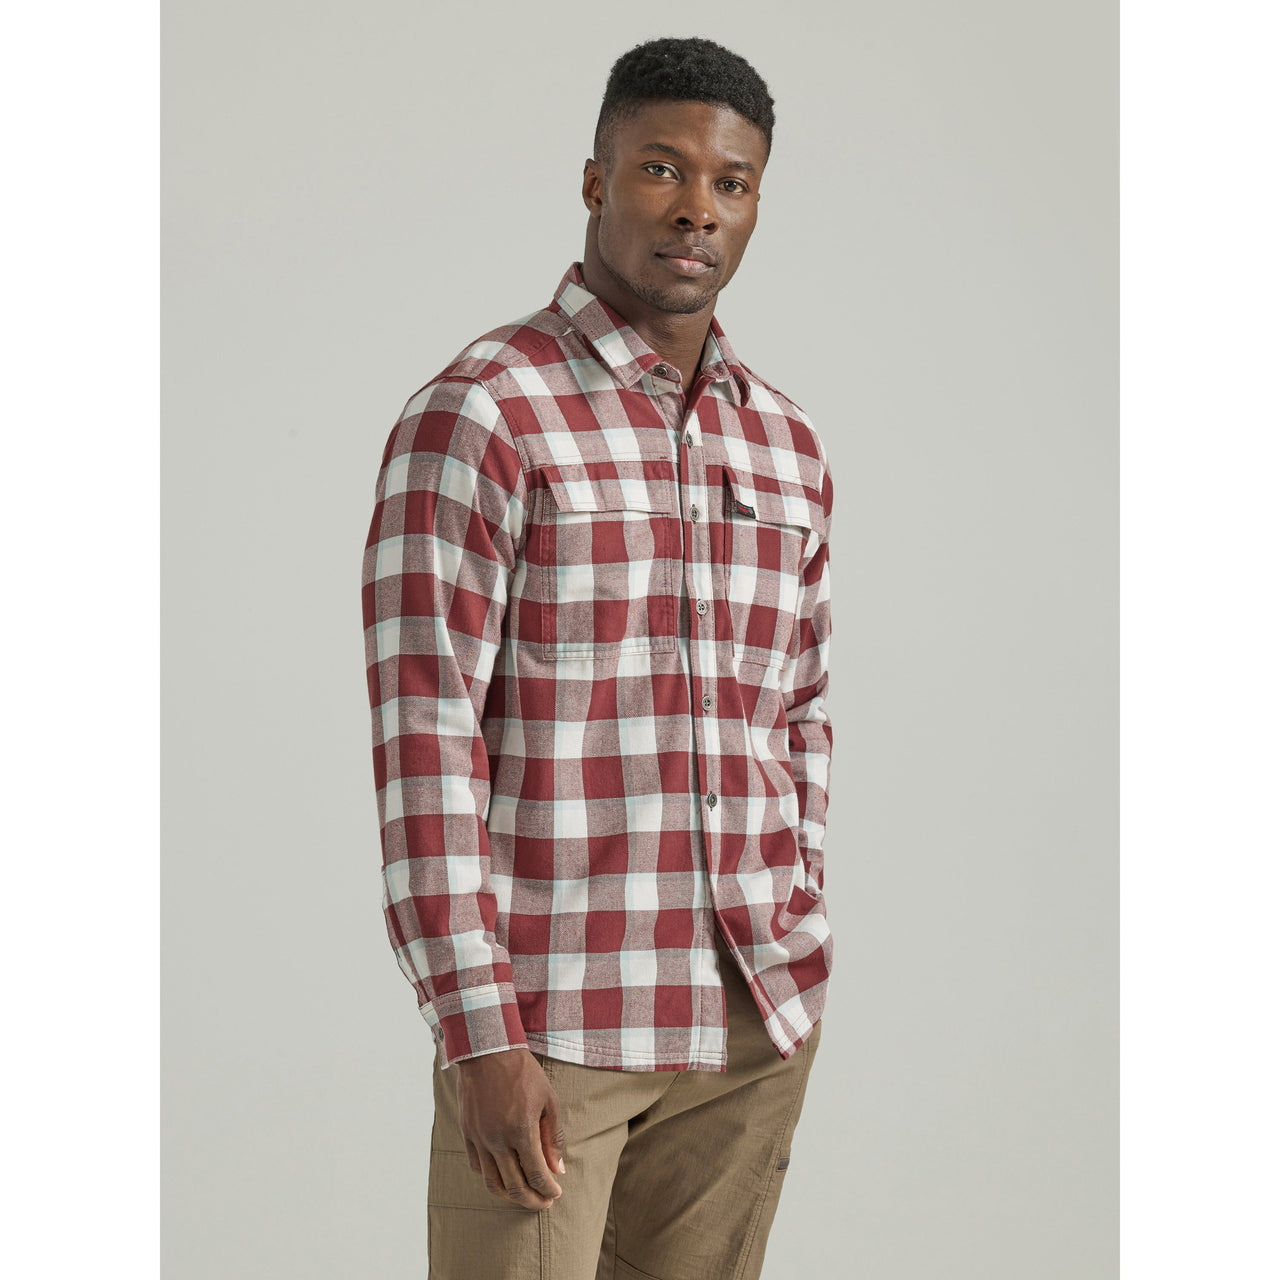 Wrangler Men's Thermal Lined Flannel Shirt - Red